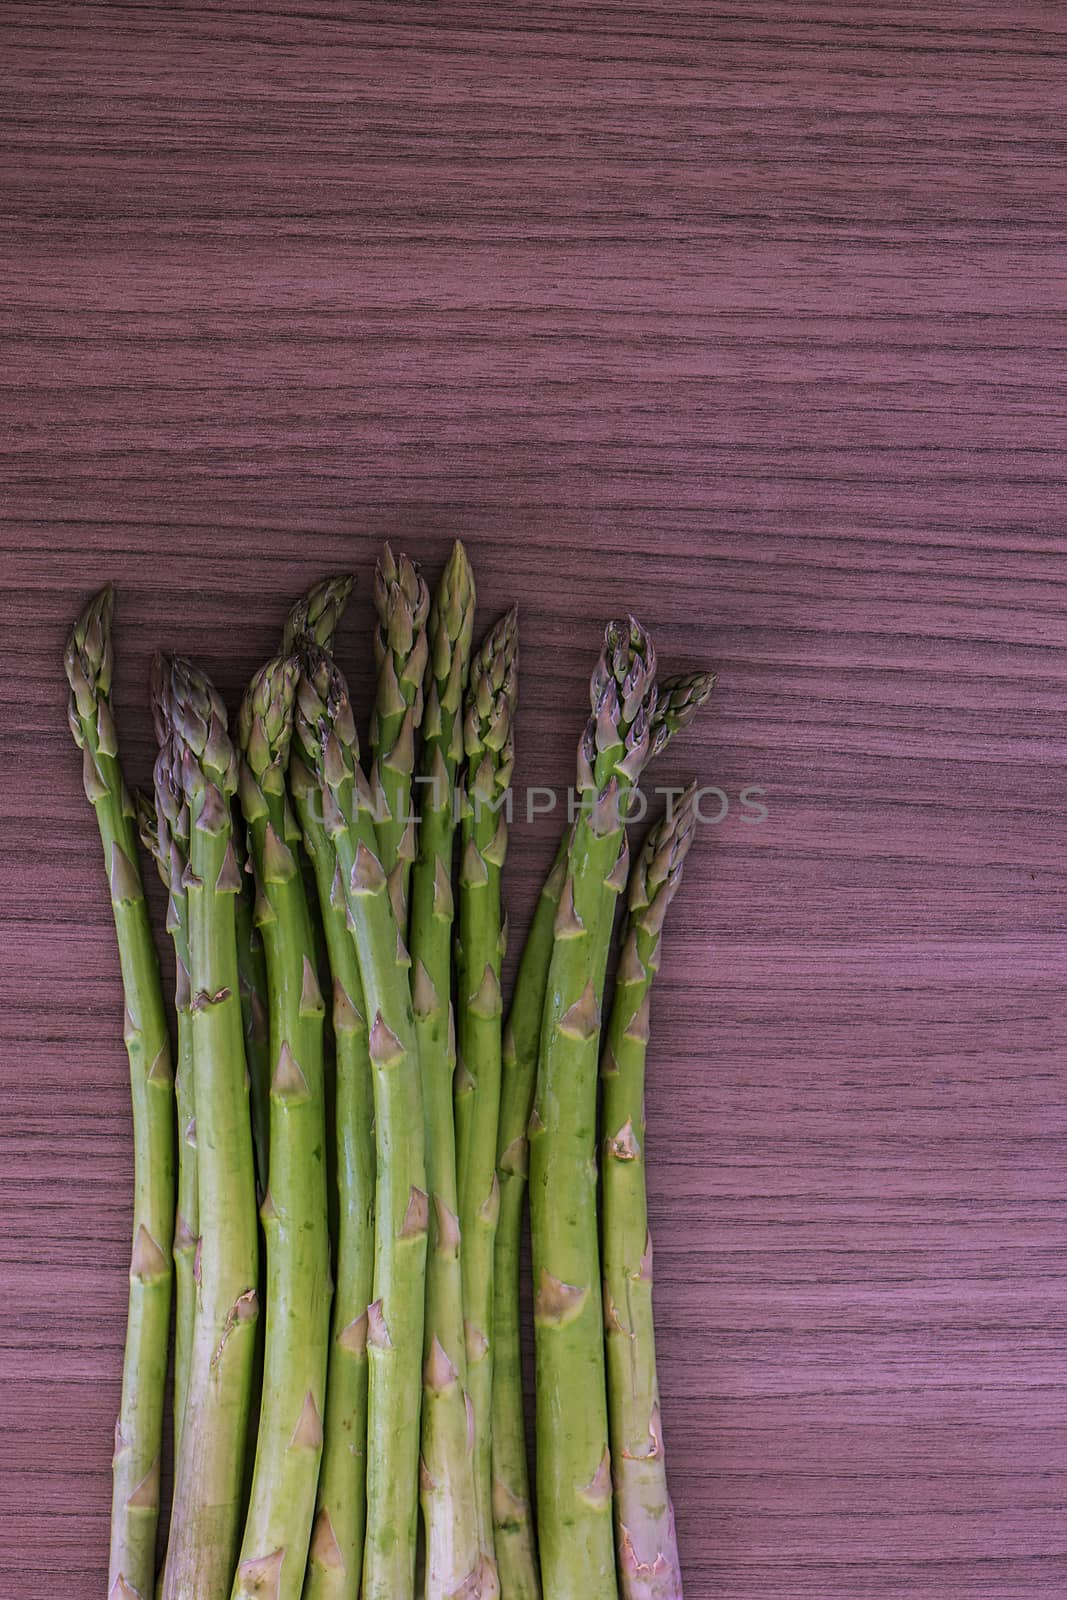 Some green fresh asparagus over wood background 